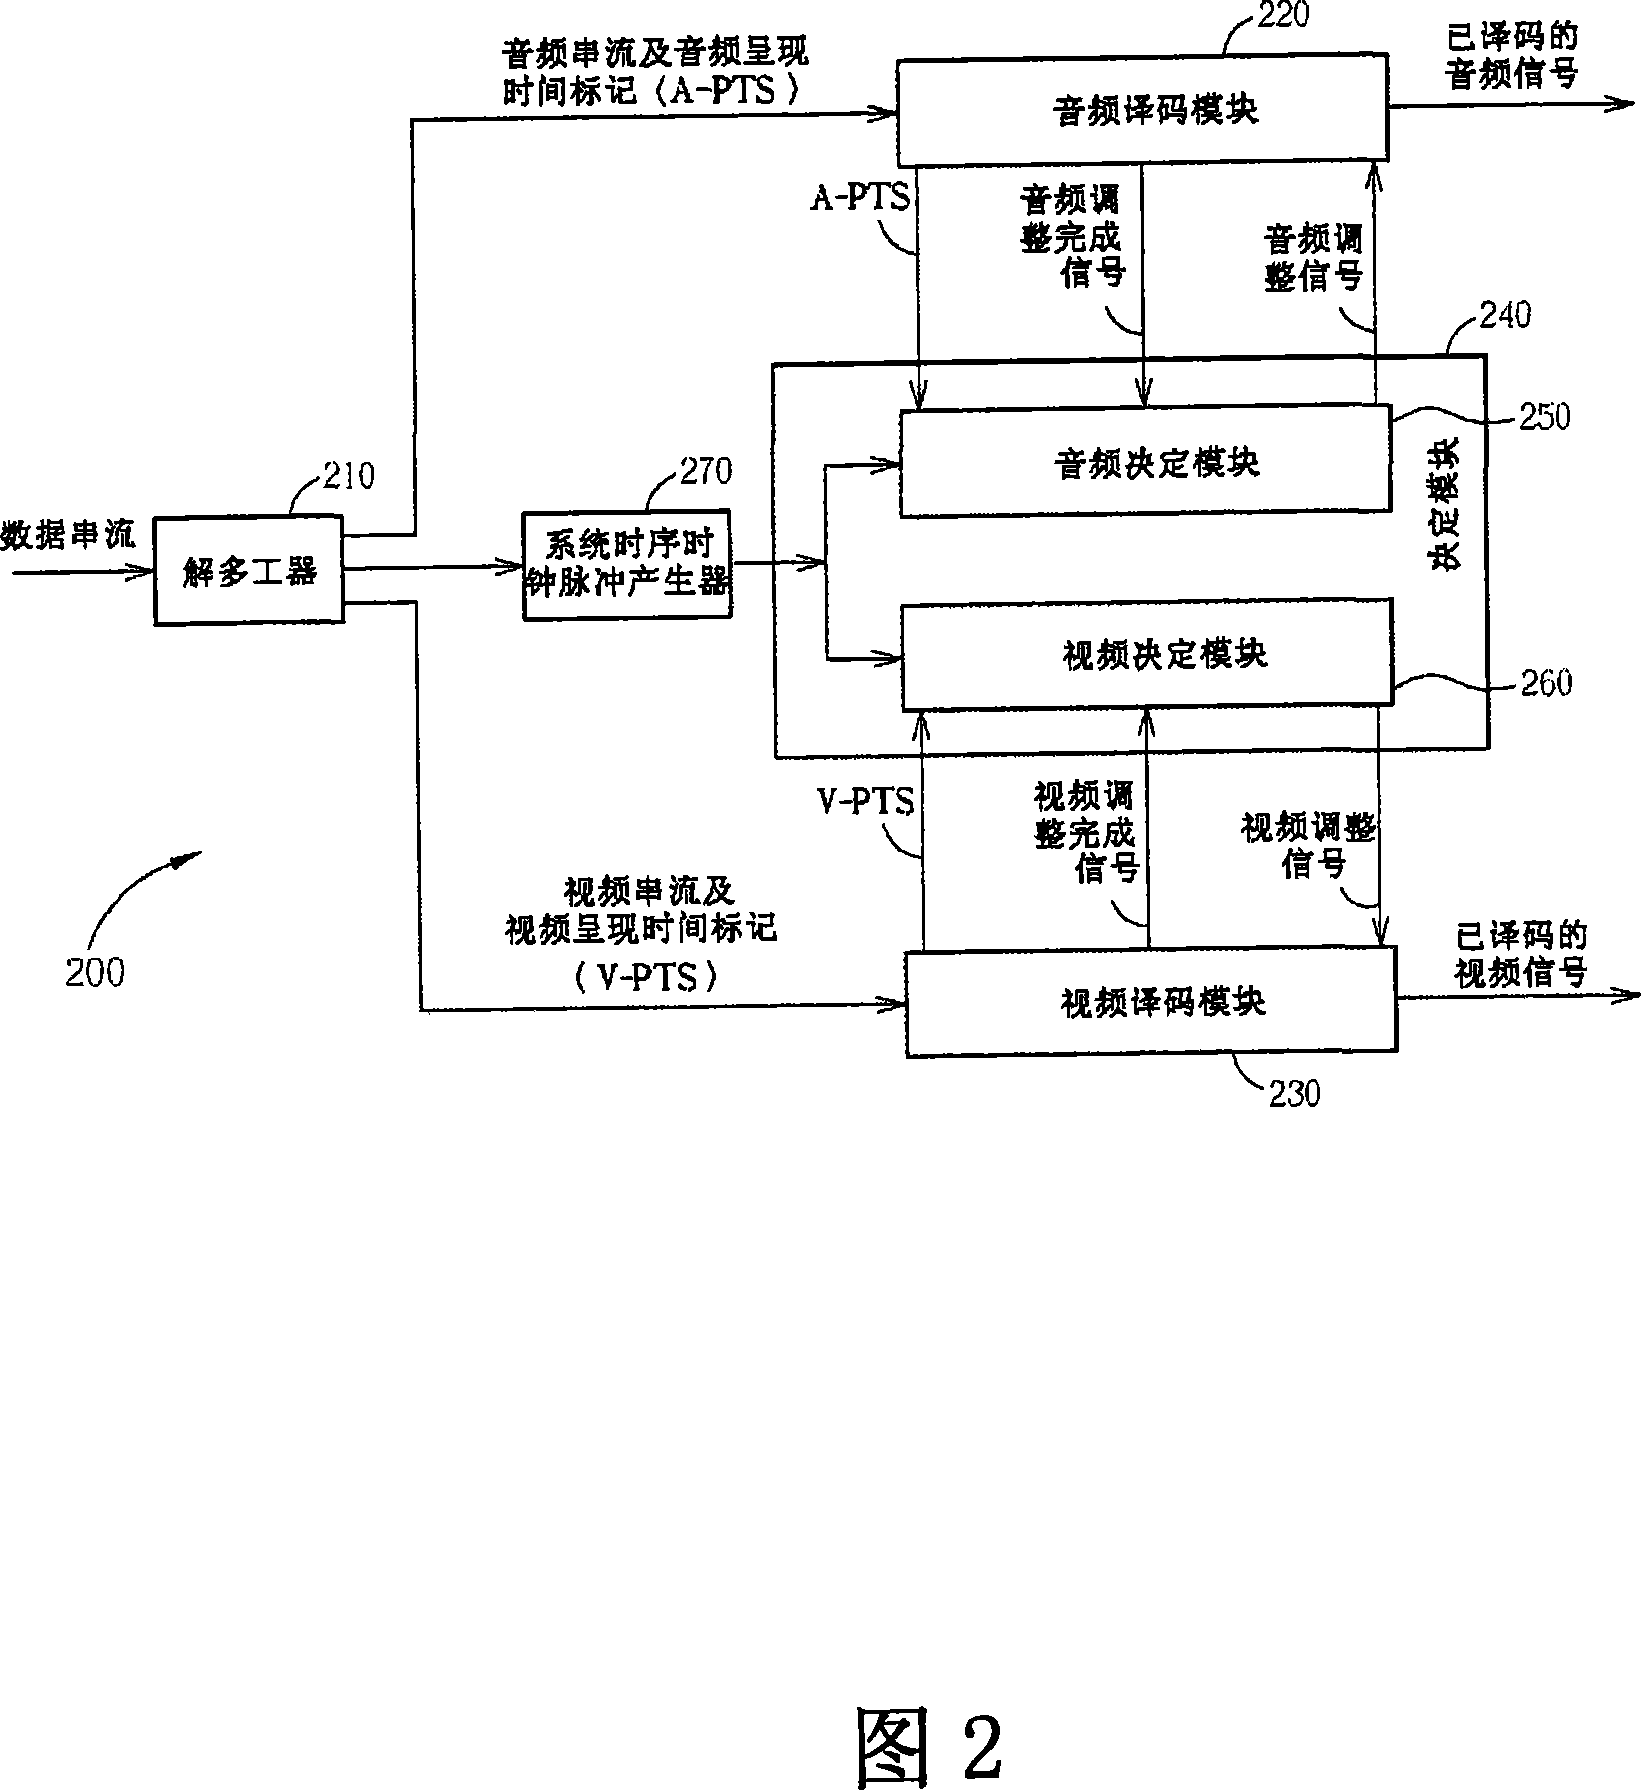 Method and system for synchronizing audio and video data